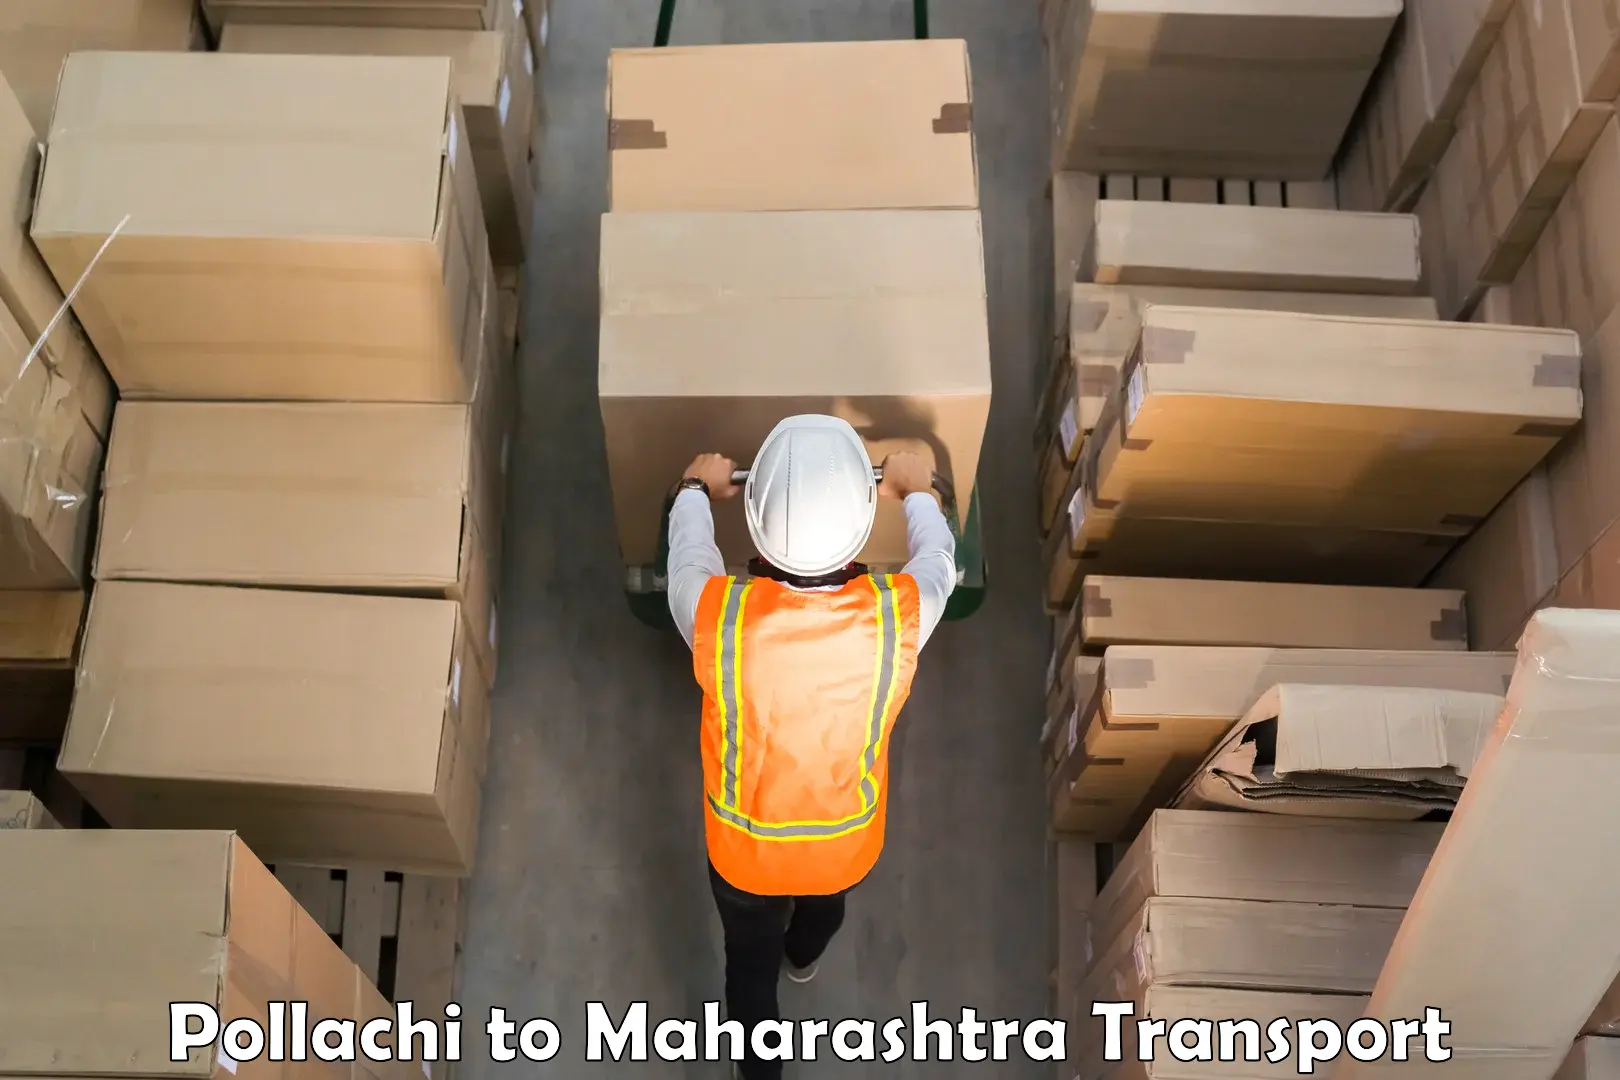 Express transport services Pollachi to Pune